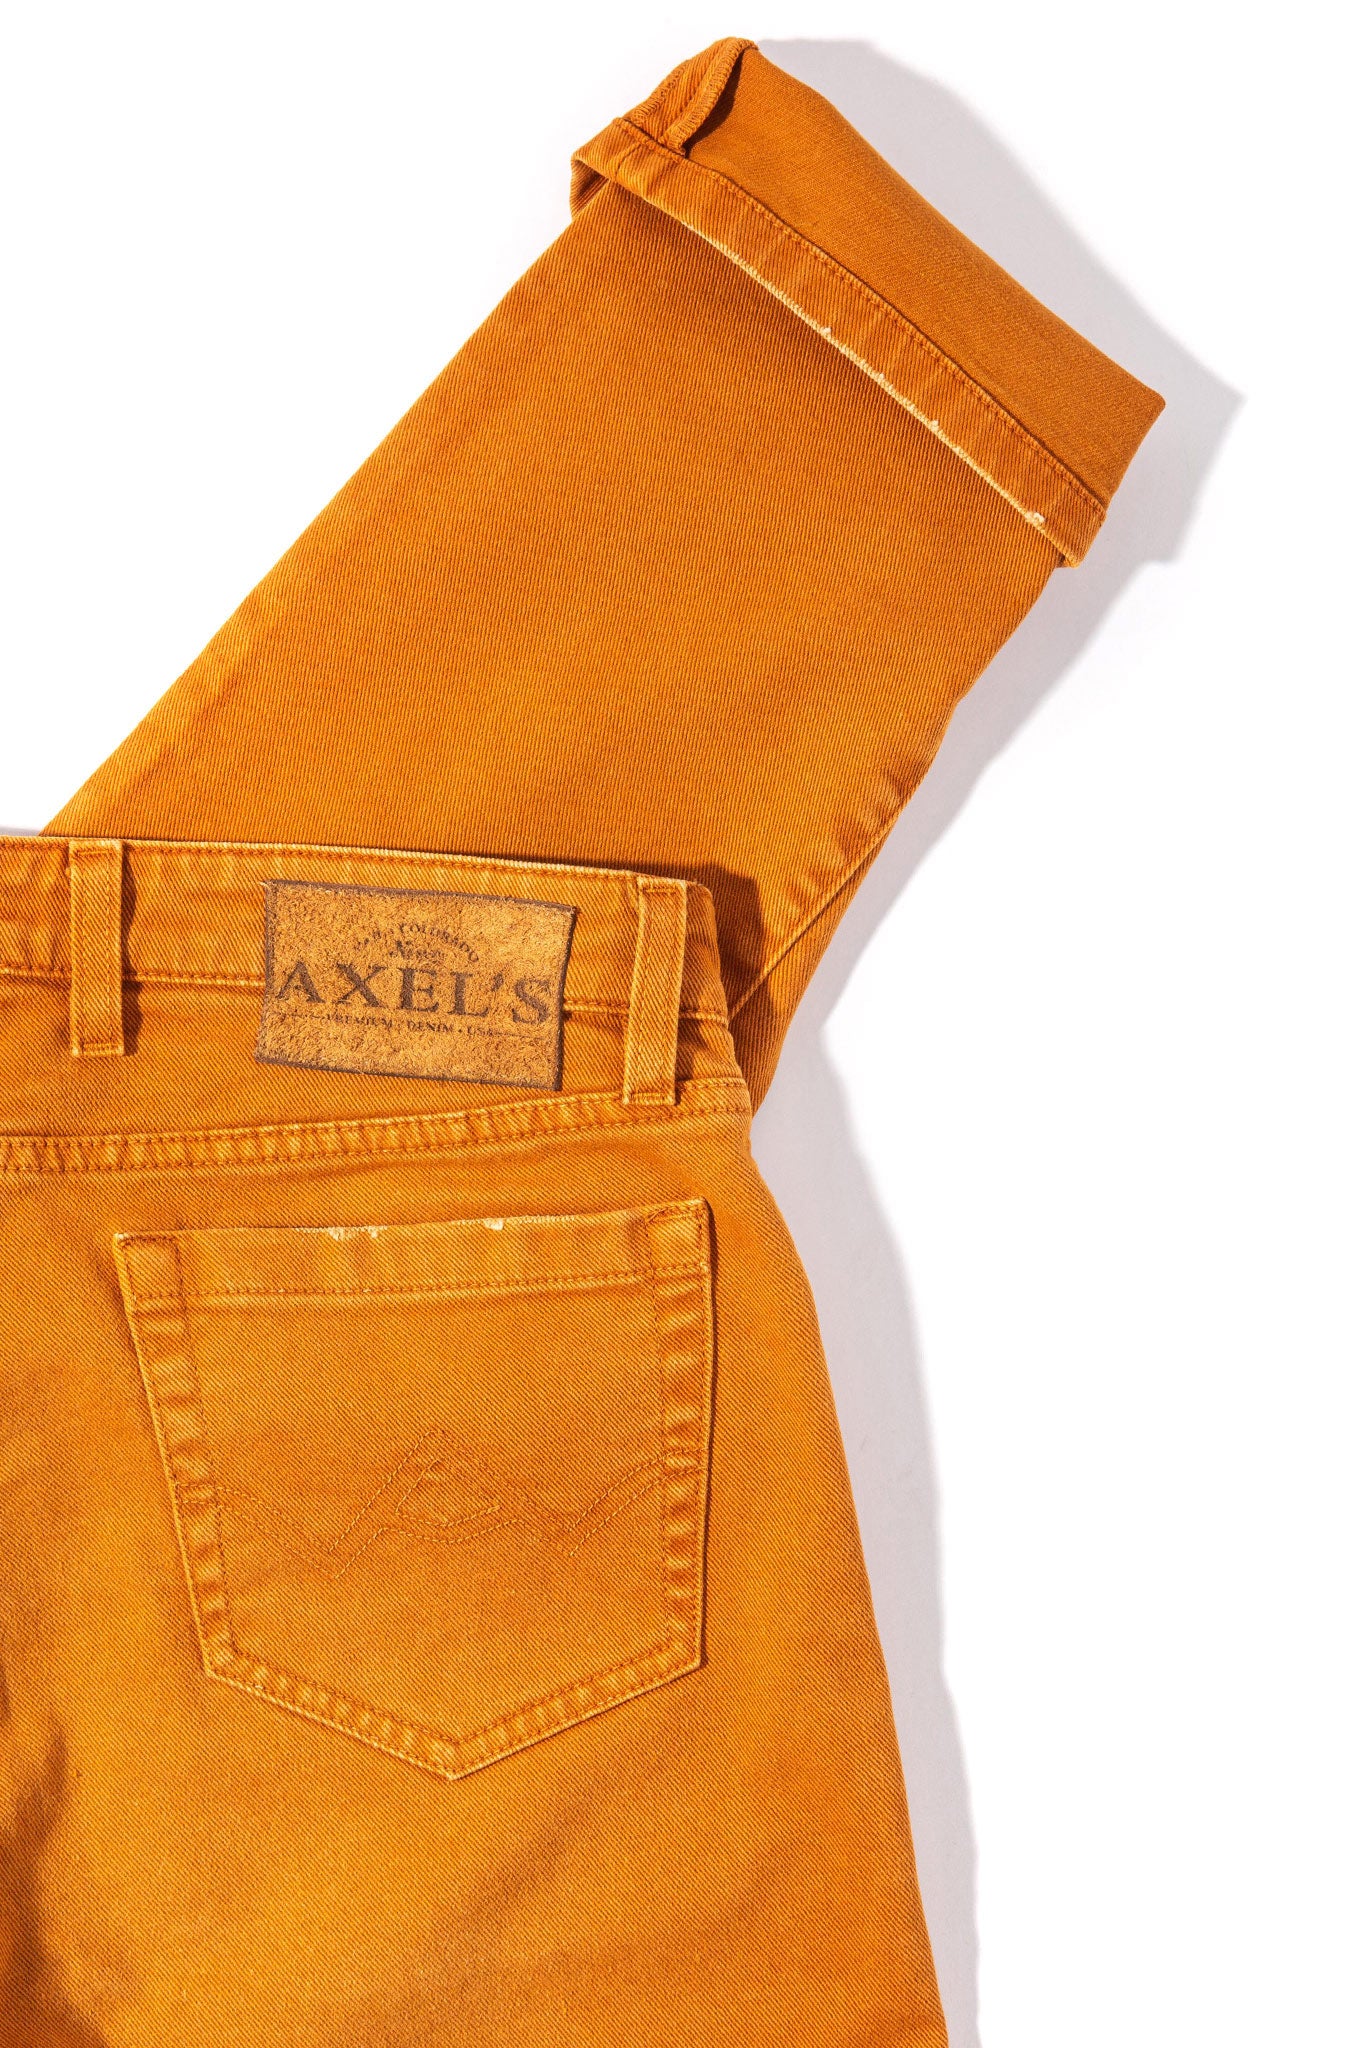 Man Approved Denim - Living in Yellow